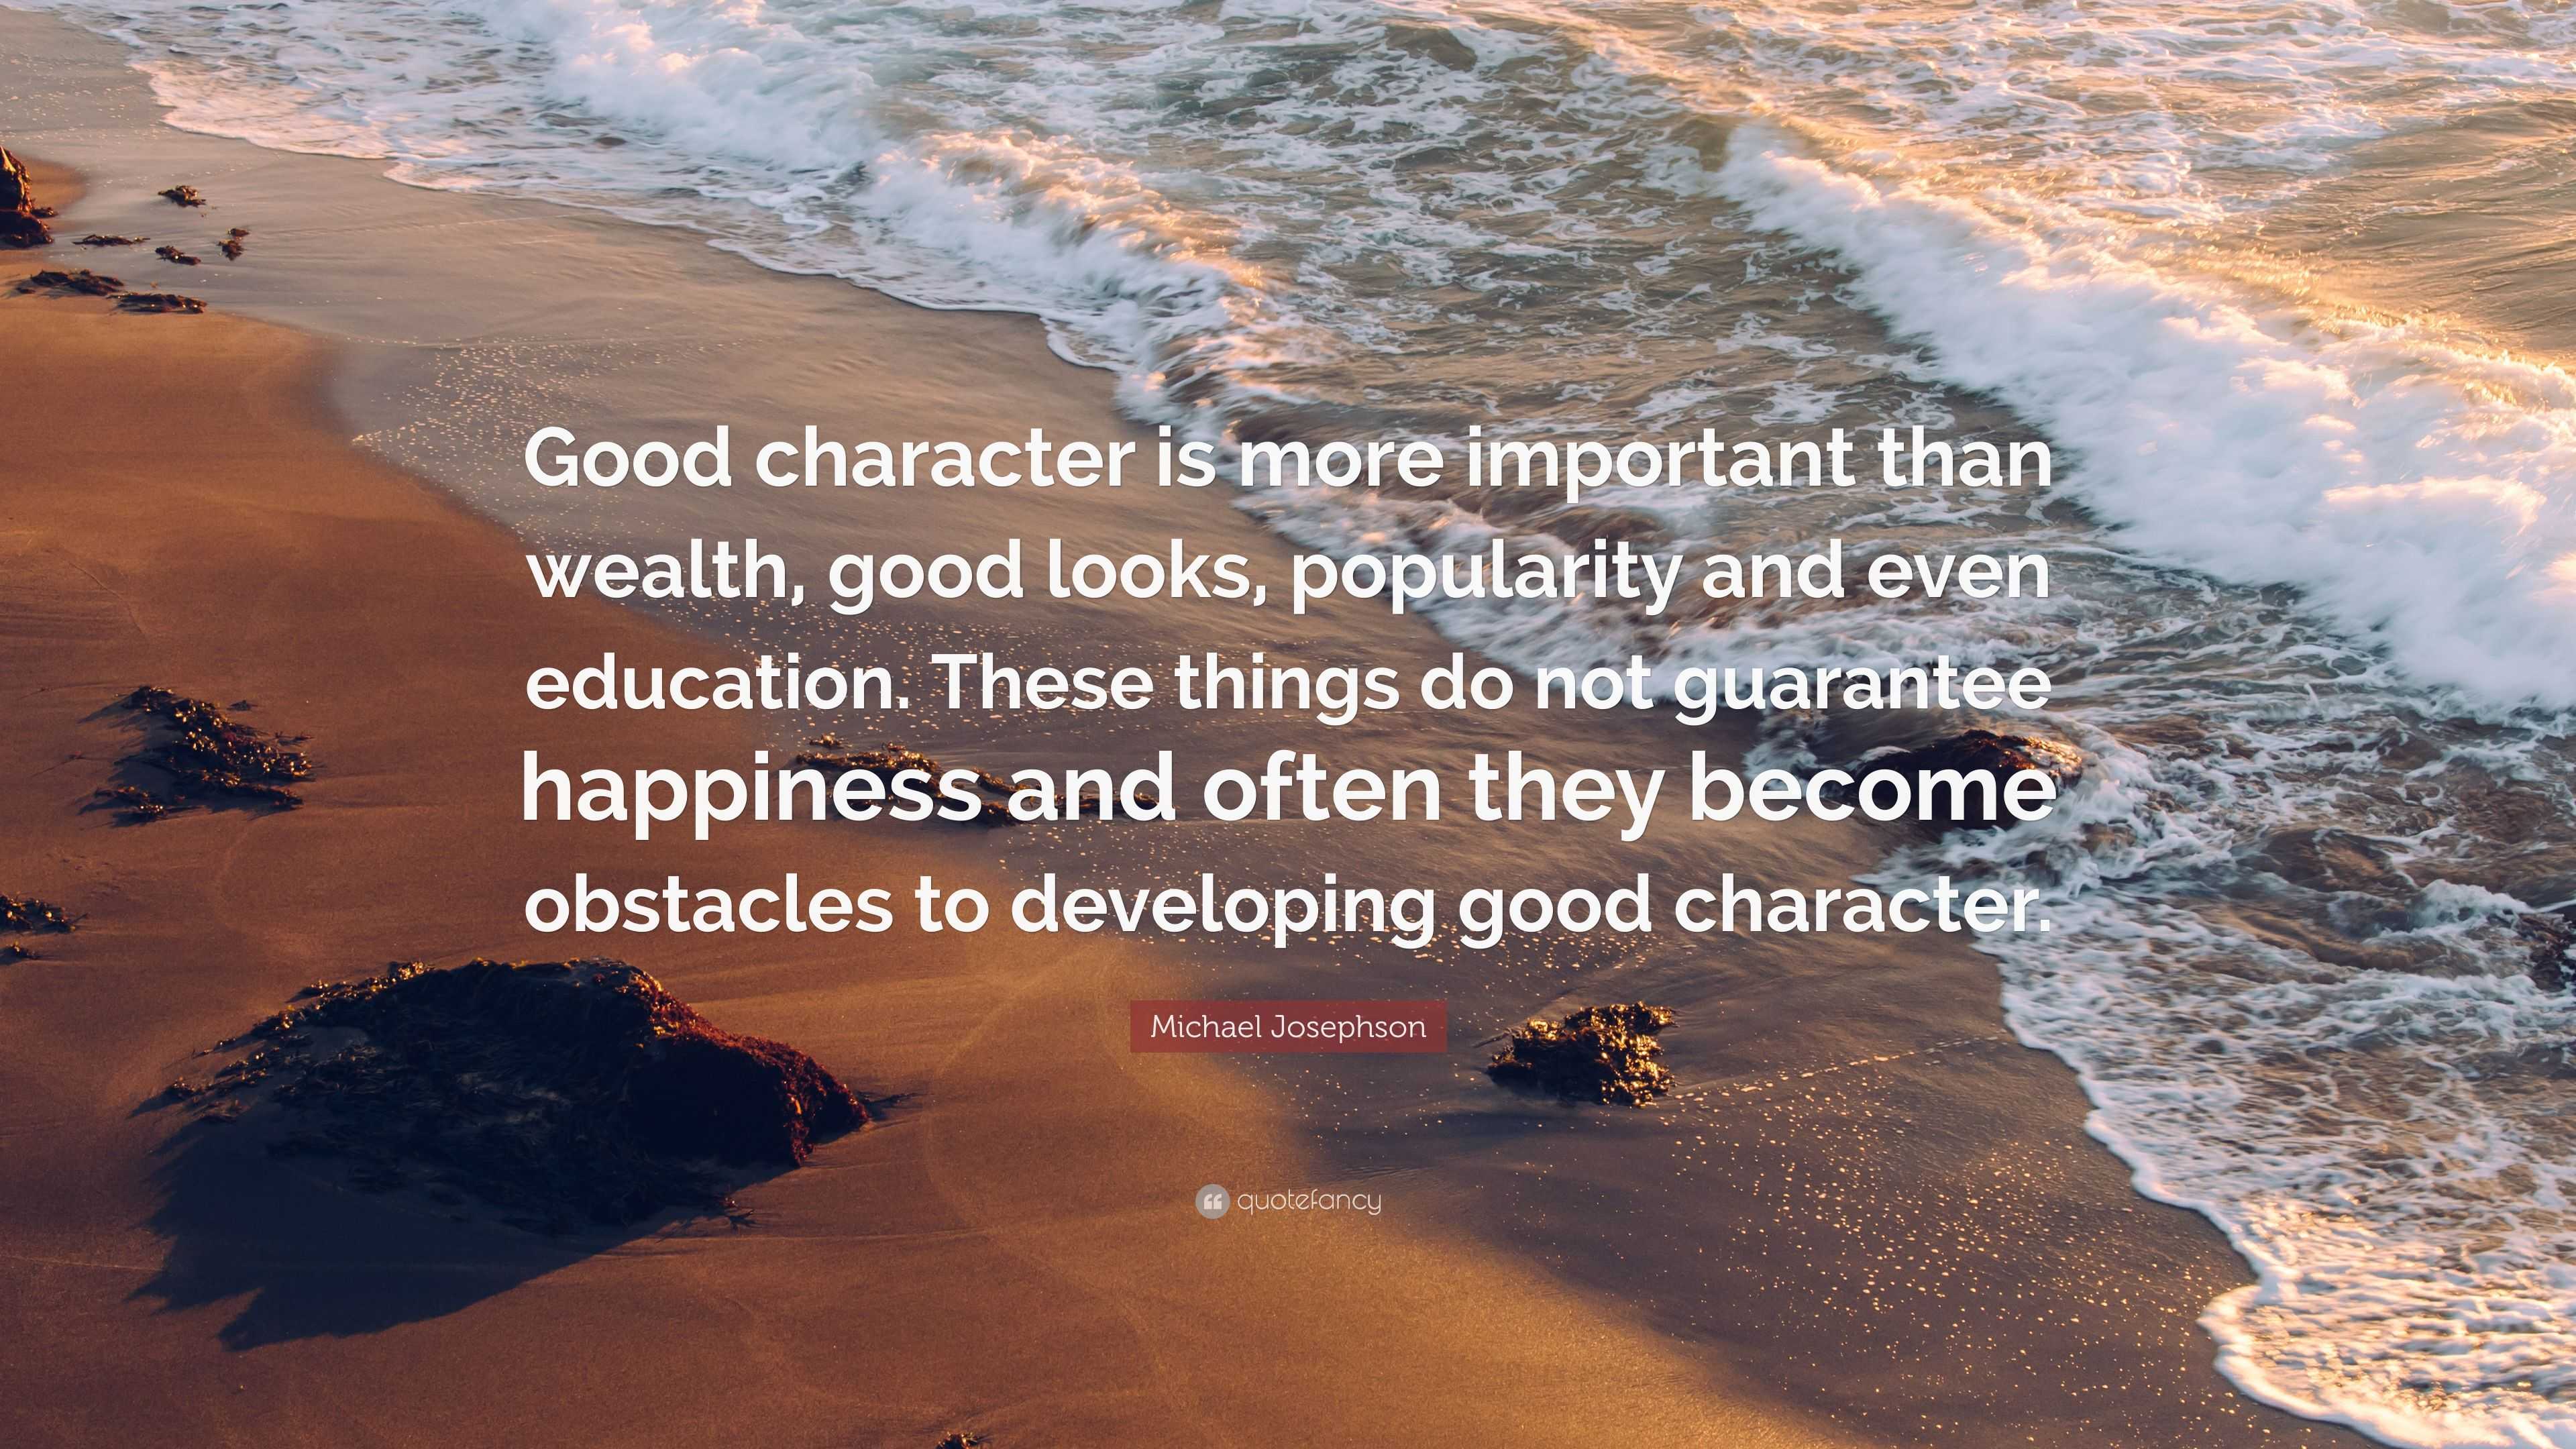 essay on character is more important than education